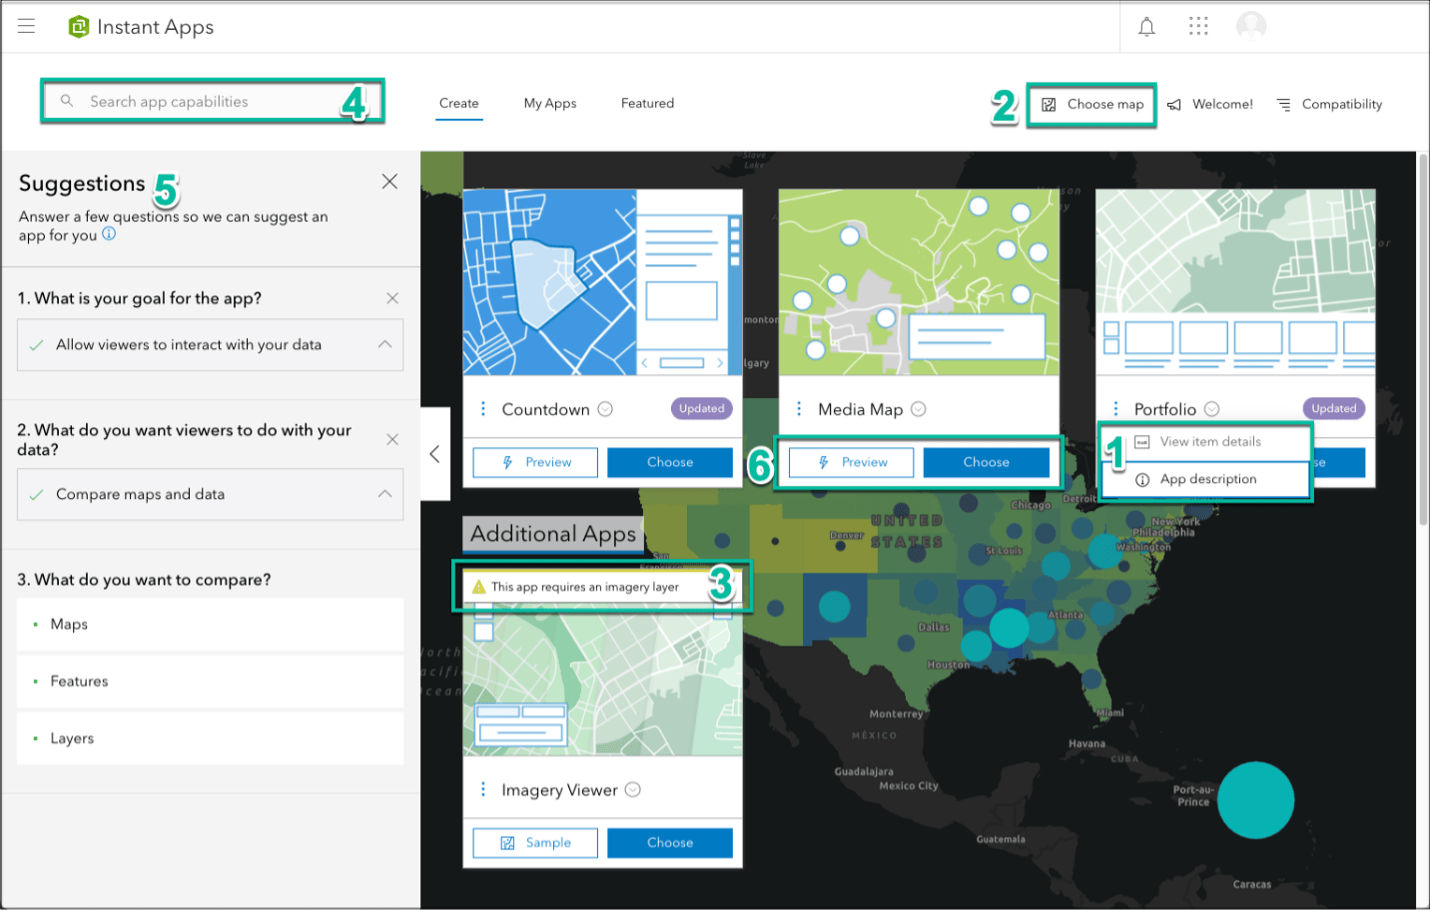 Numbered image of the ArcGIS Instant Apps home page